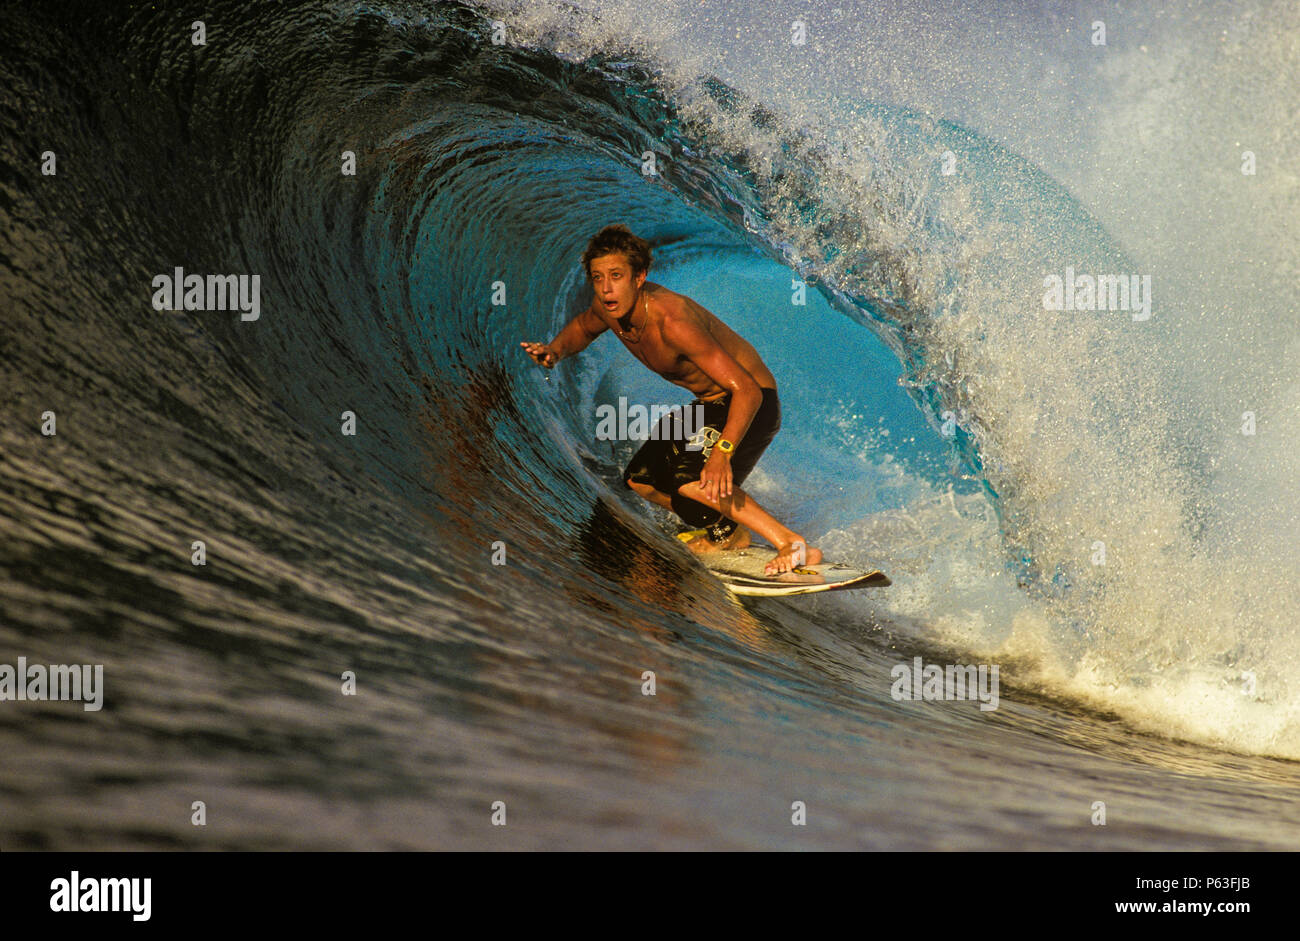 Surfing the tube at Lances Right in the Mentawai Islands, Indonesia Stock Photo